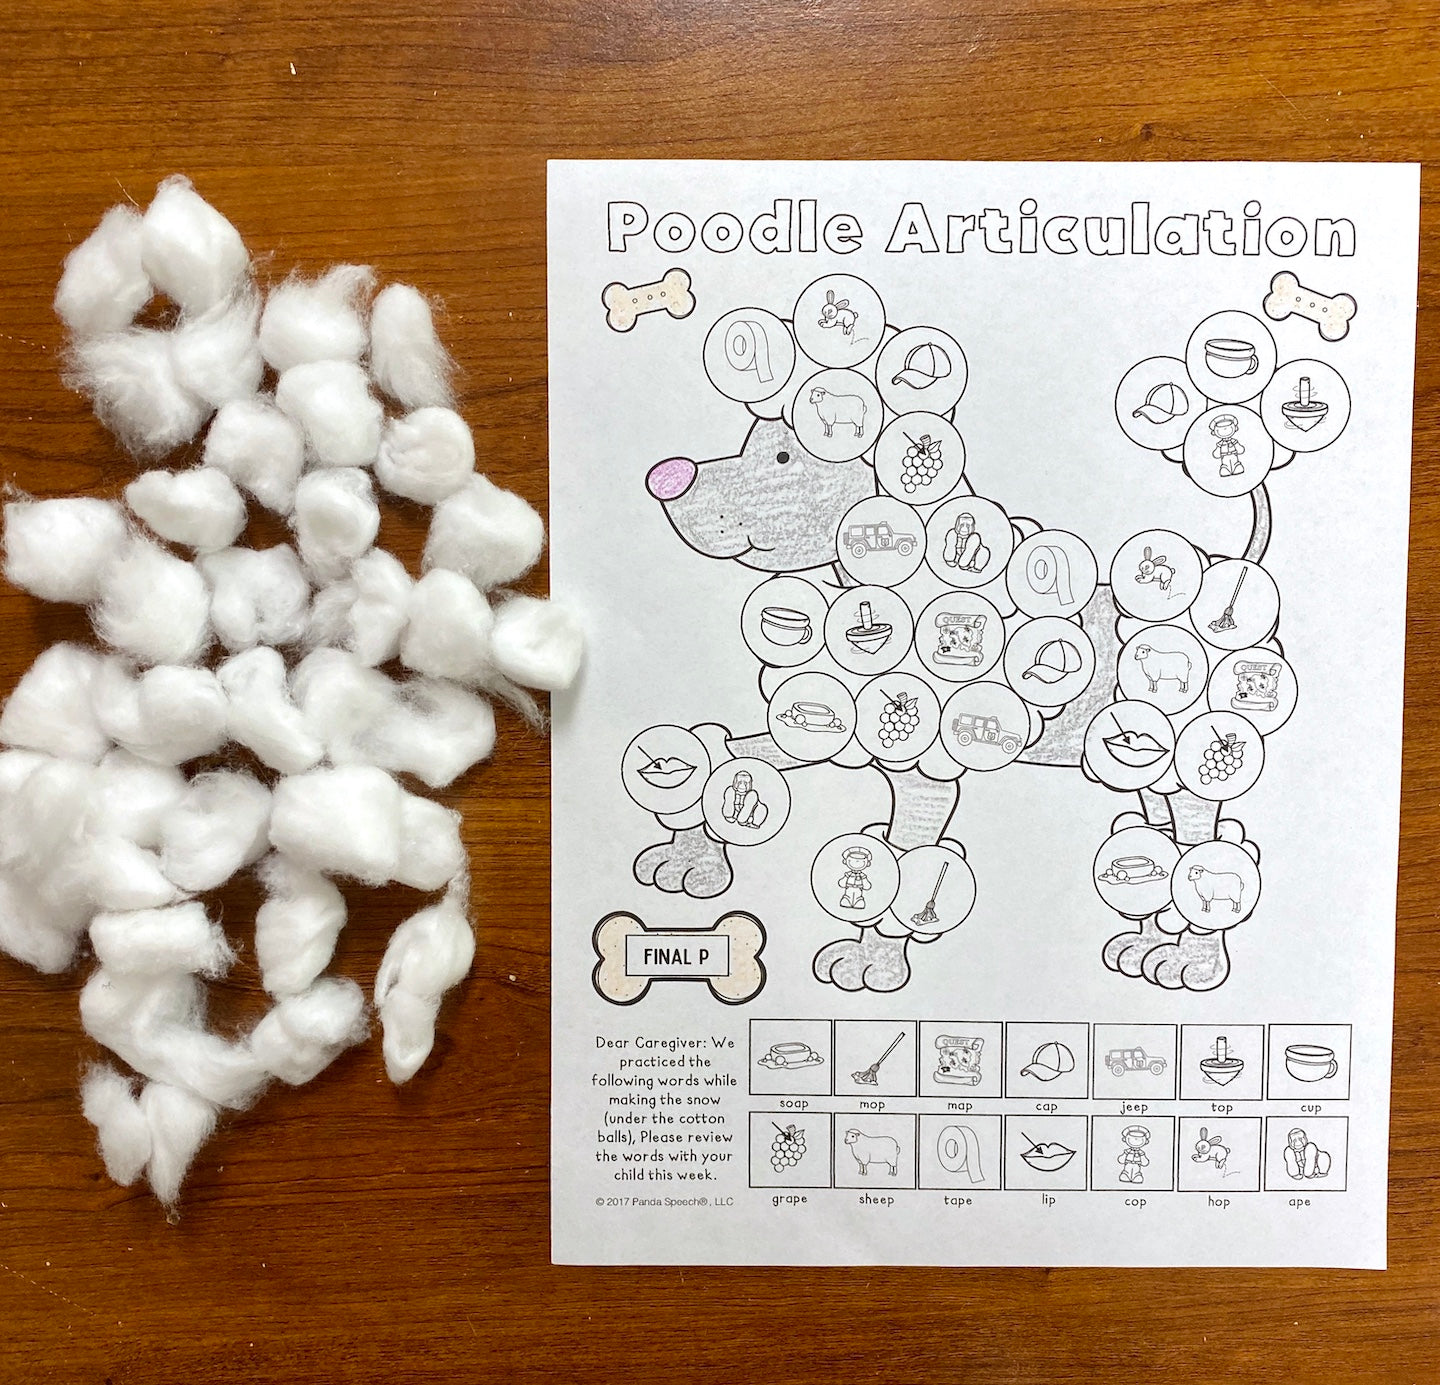 Poodle Articulation and Language! Speech Therapy Cotton Ball craft